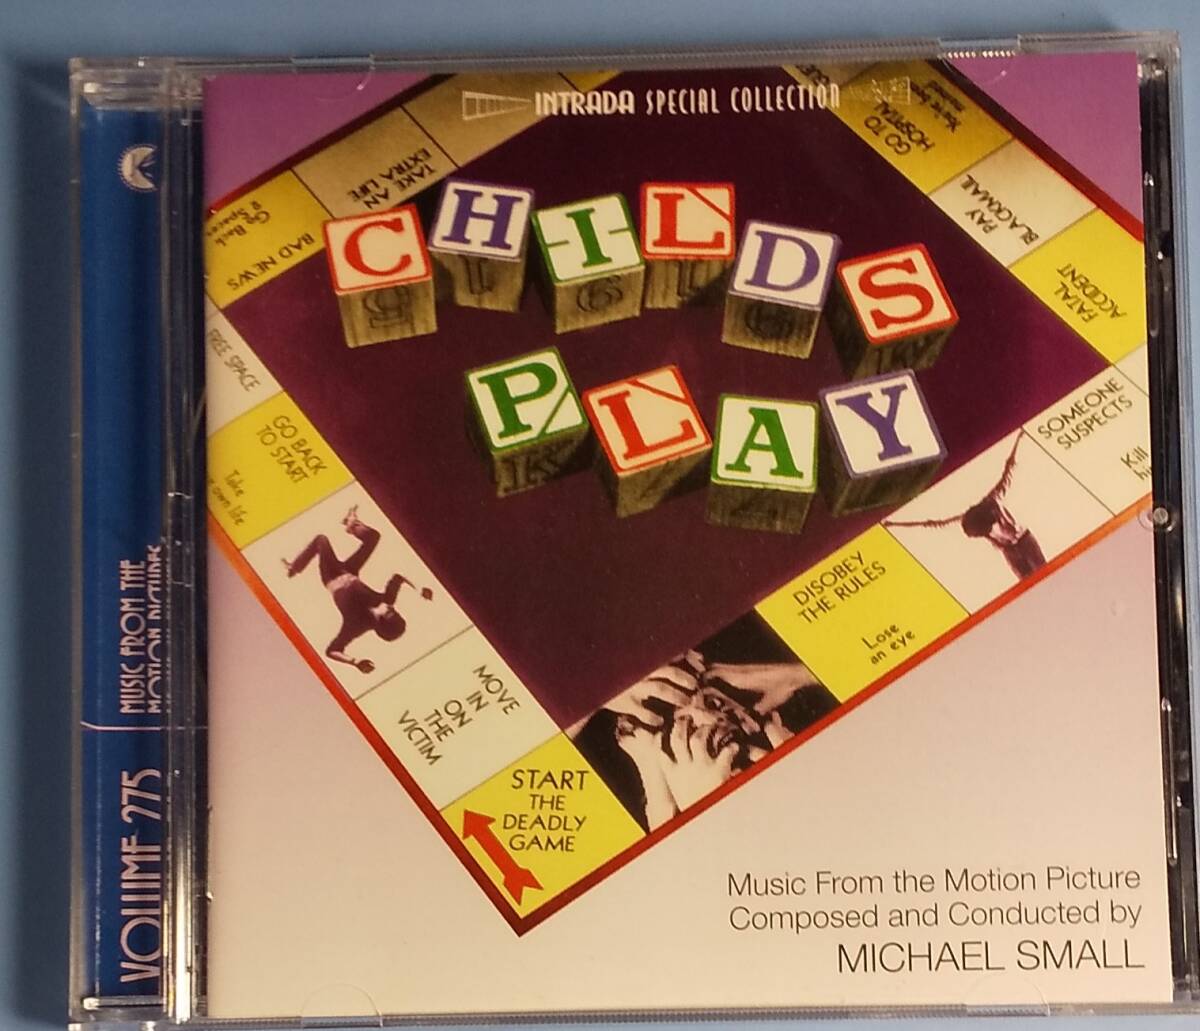 * limitation soundtrack CD[ family. ./ Childs play] Michael * small *